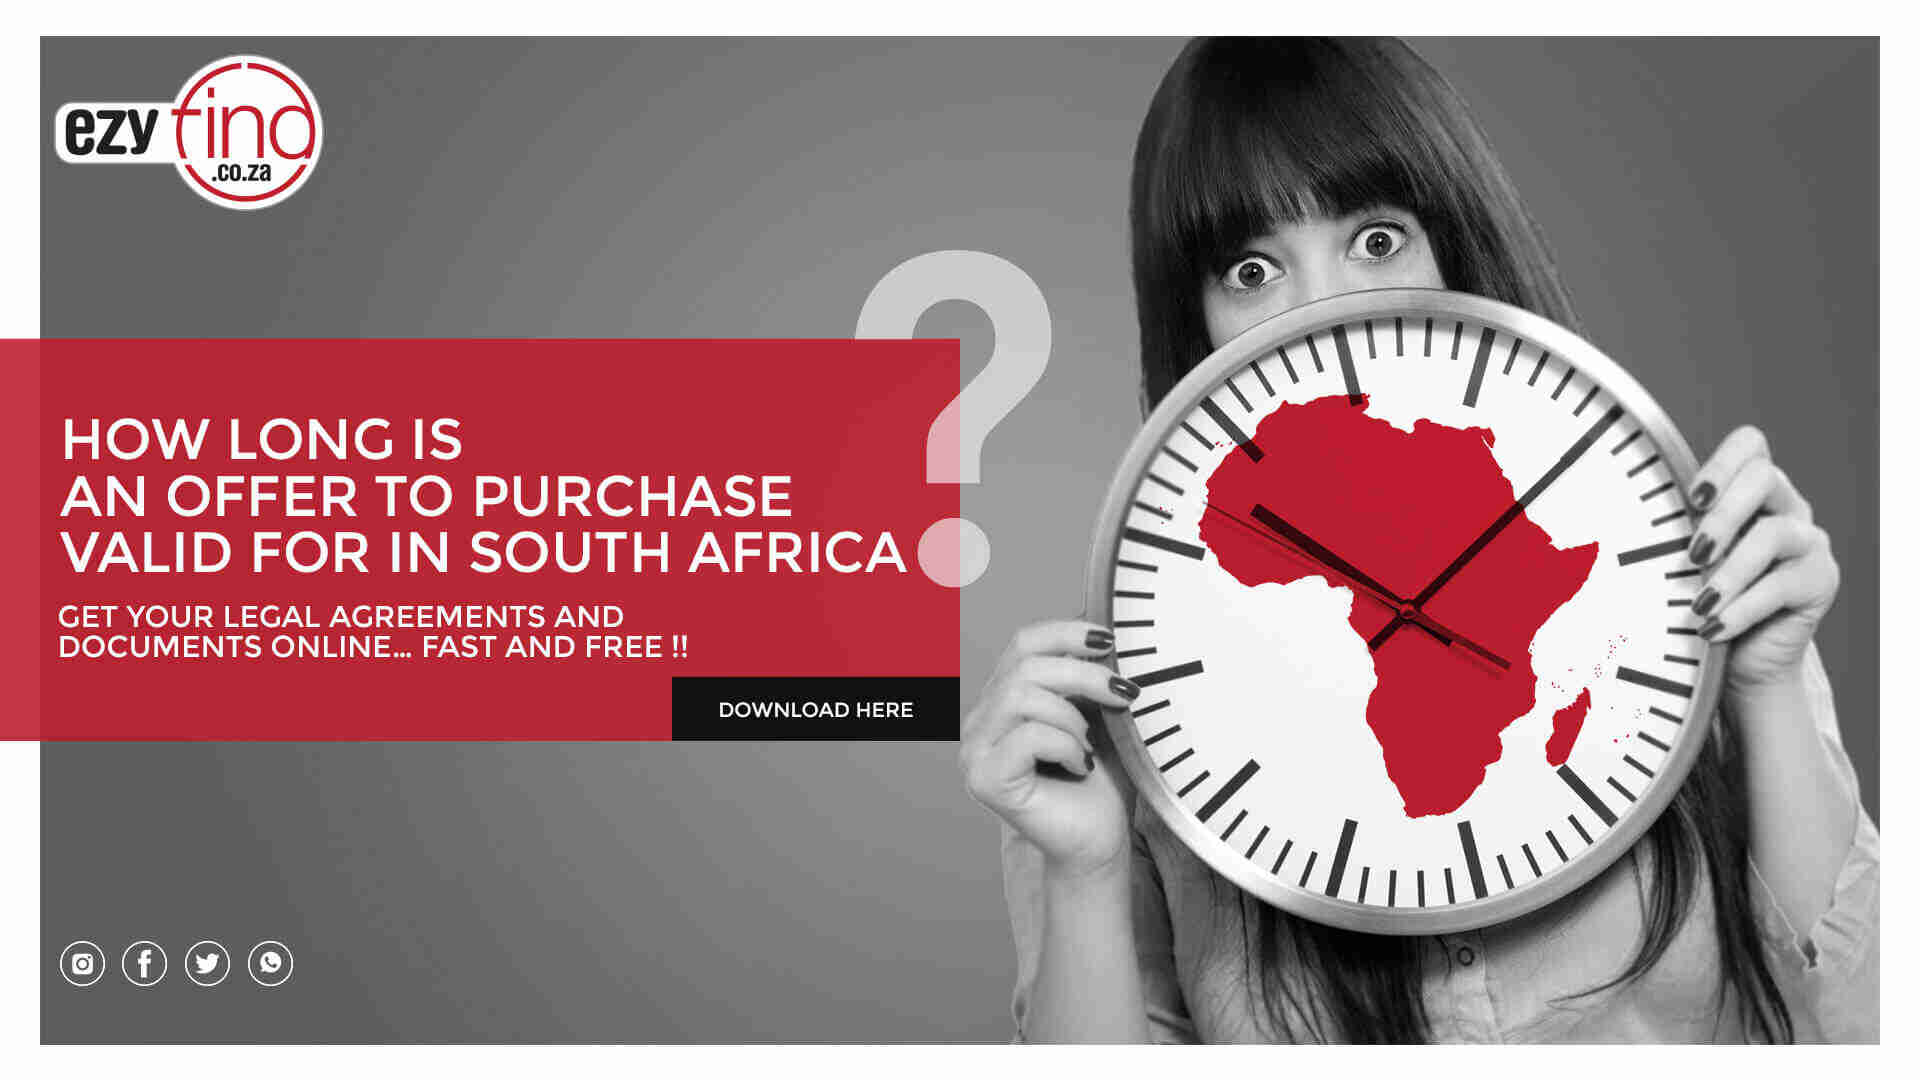 How long is an offer to purchase valid for in South Africa?